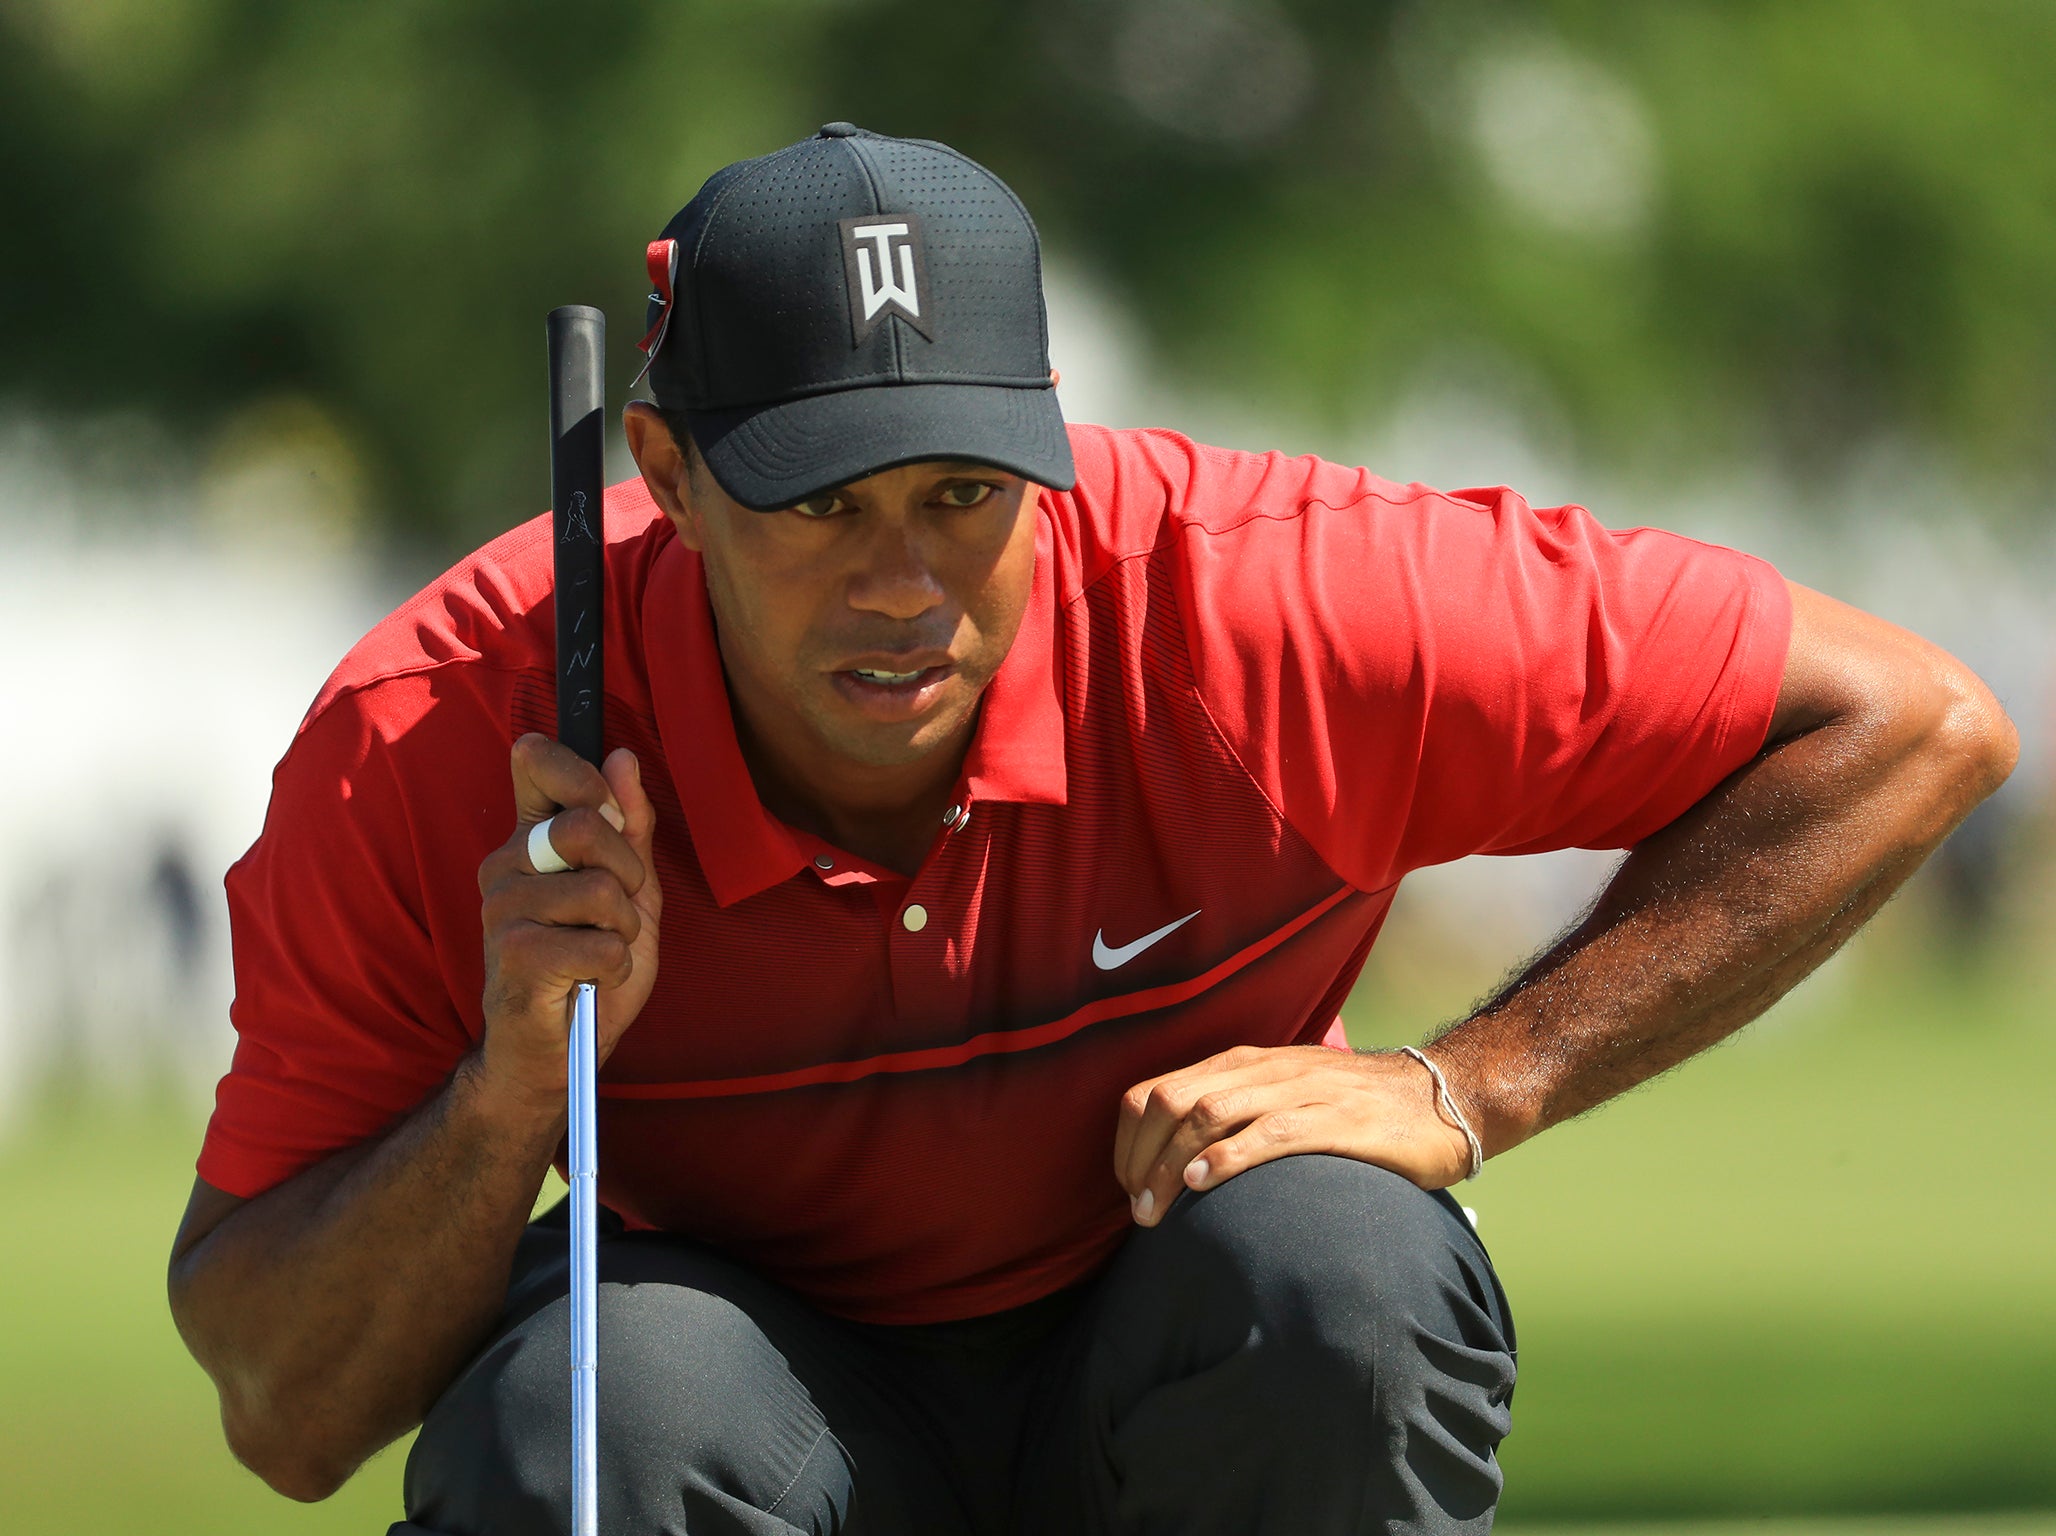 Tiger Woods says he will take confidence from his performance